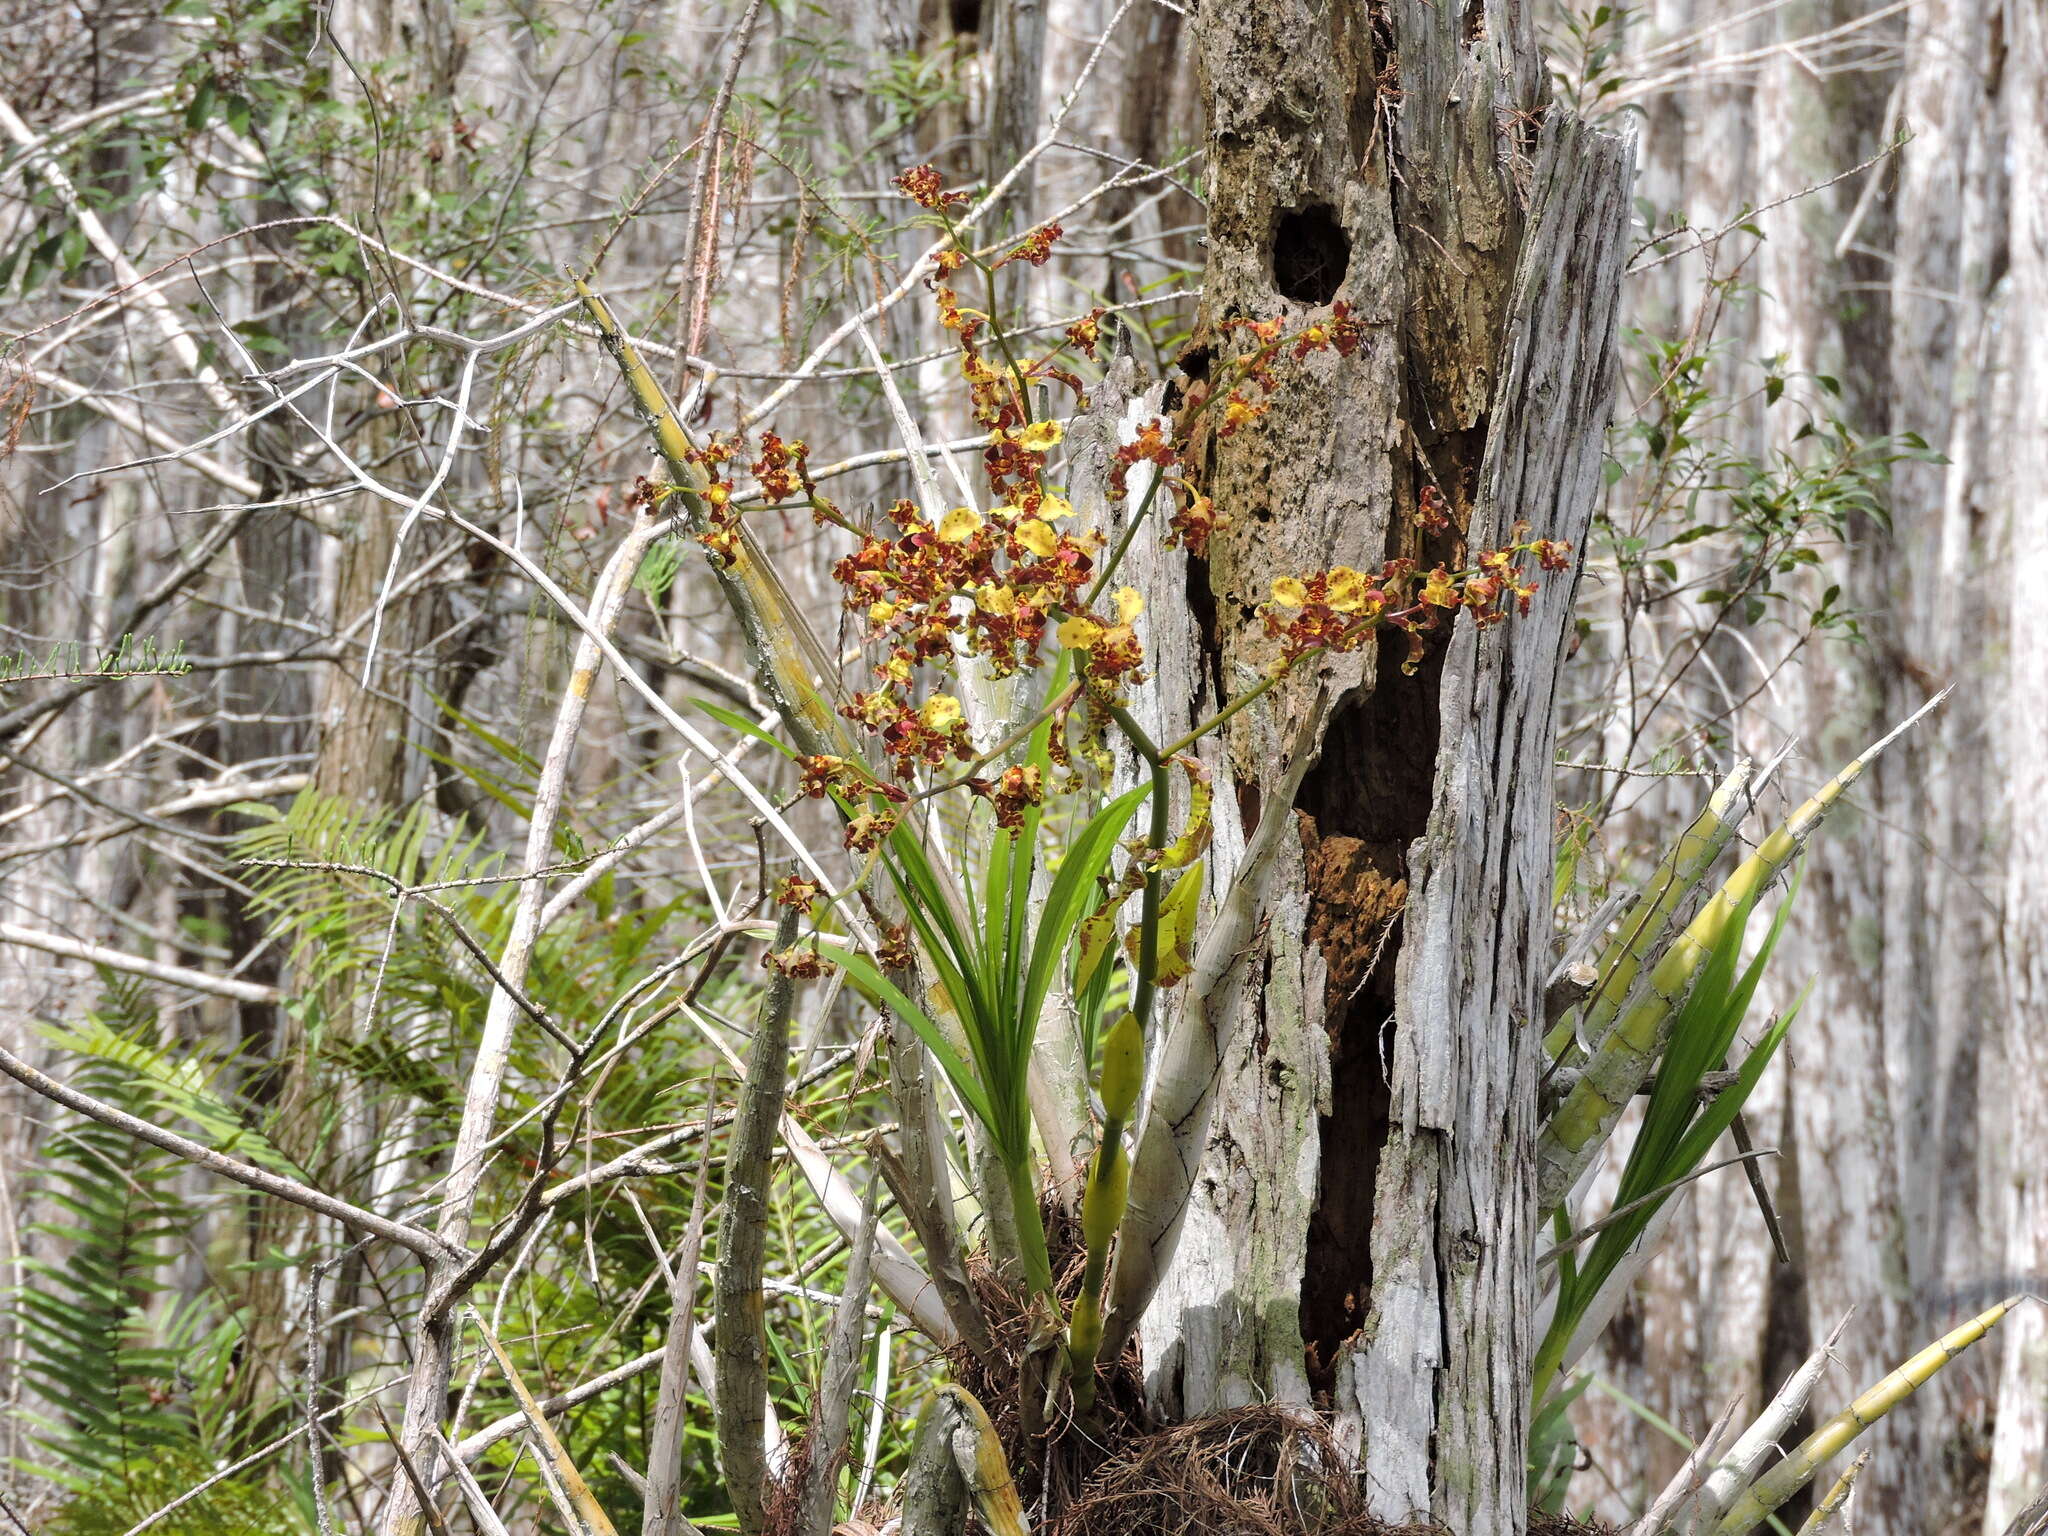 Image of cowhorn orchid